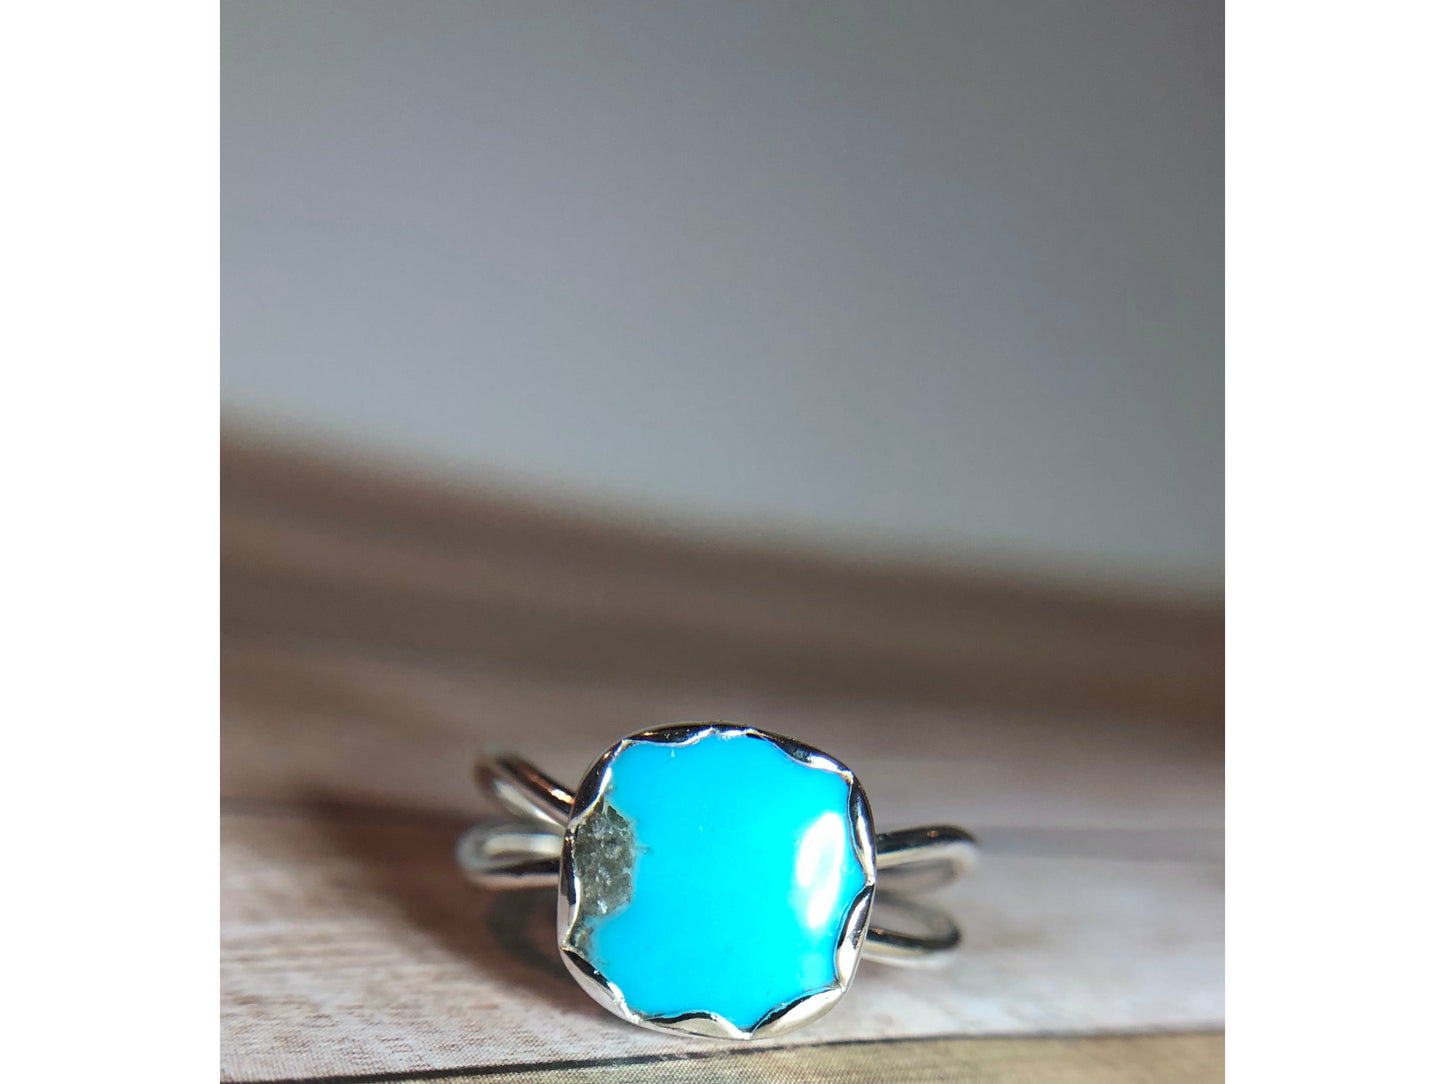 Small turquoise ring with square shaped stone.